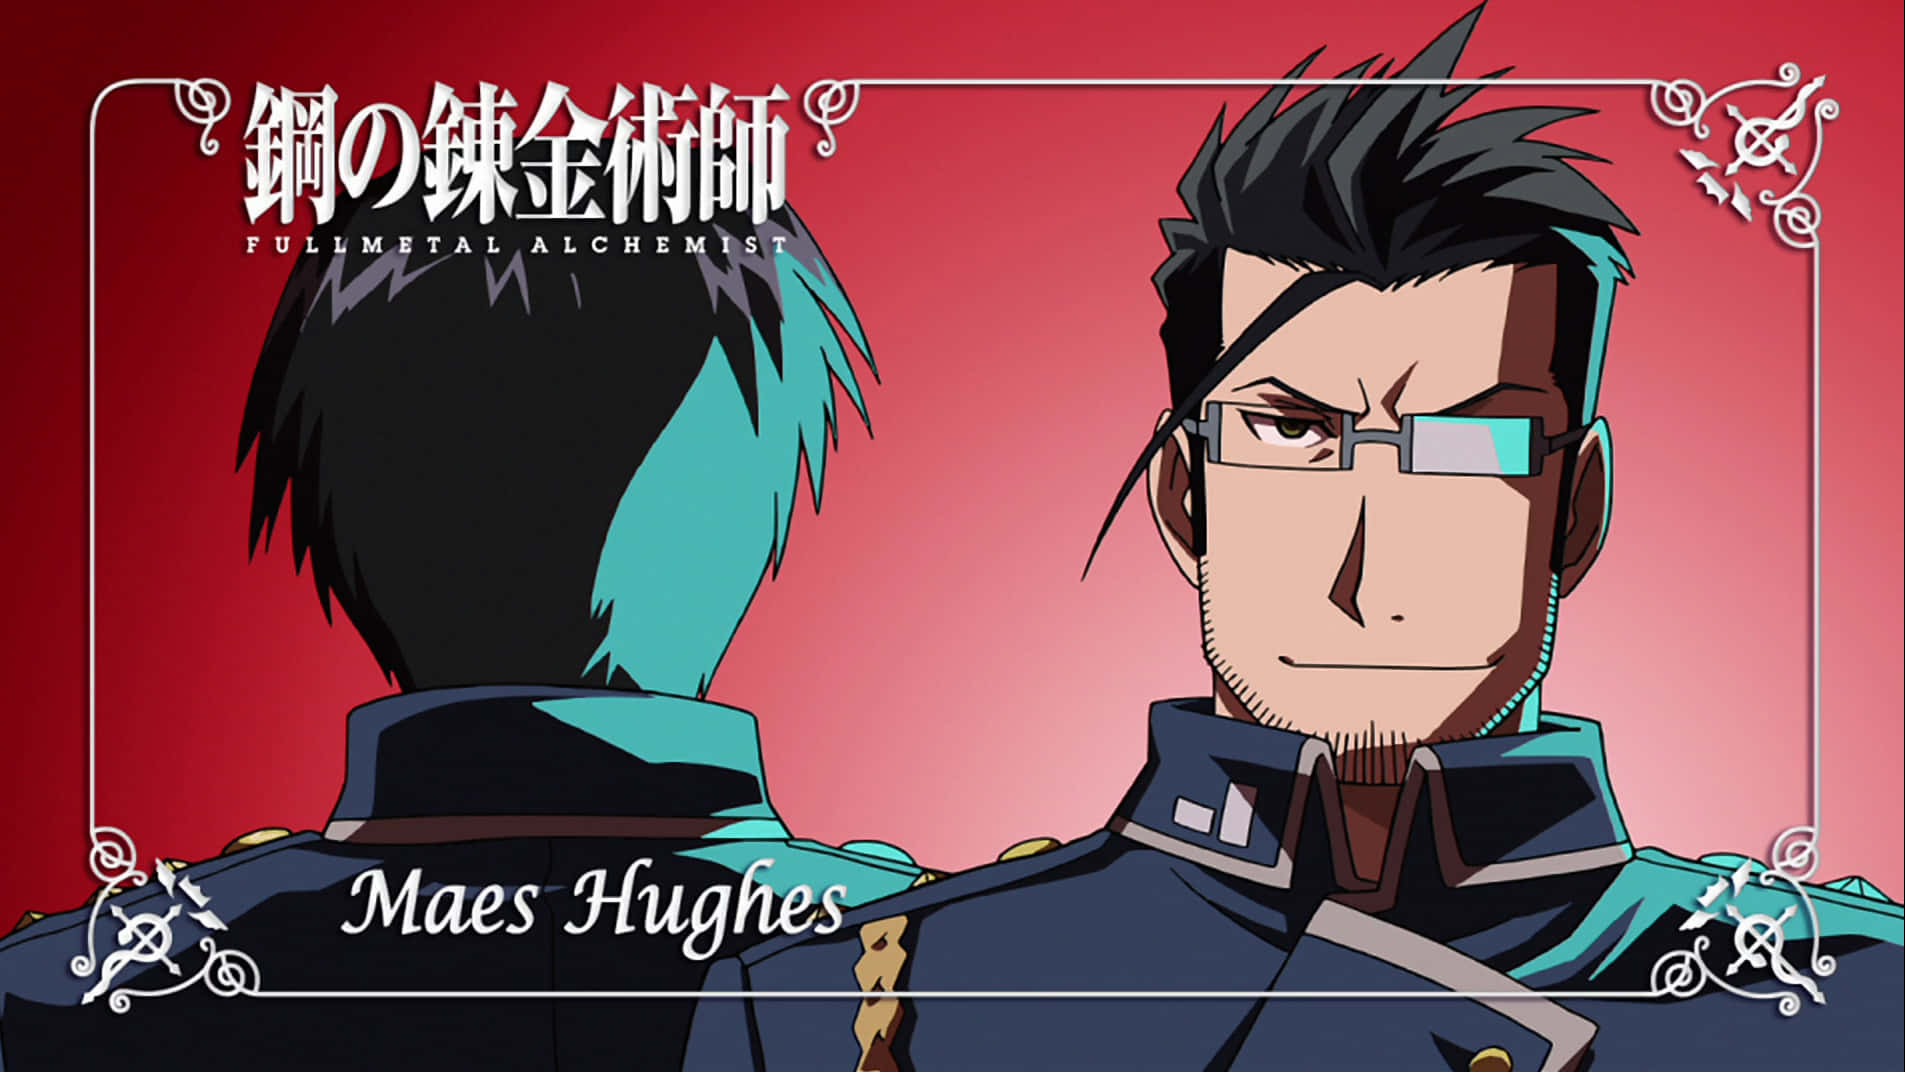 Maes Hughes - The Intelligent and Committed Investigator of the Amestris Military Wallpaper